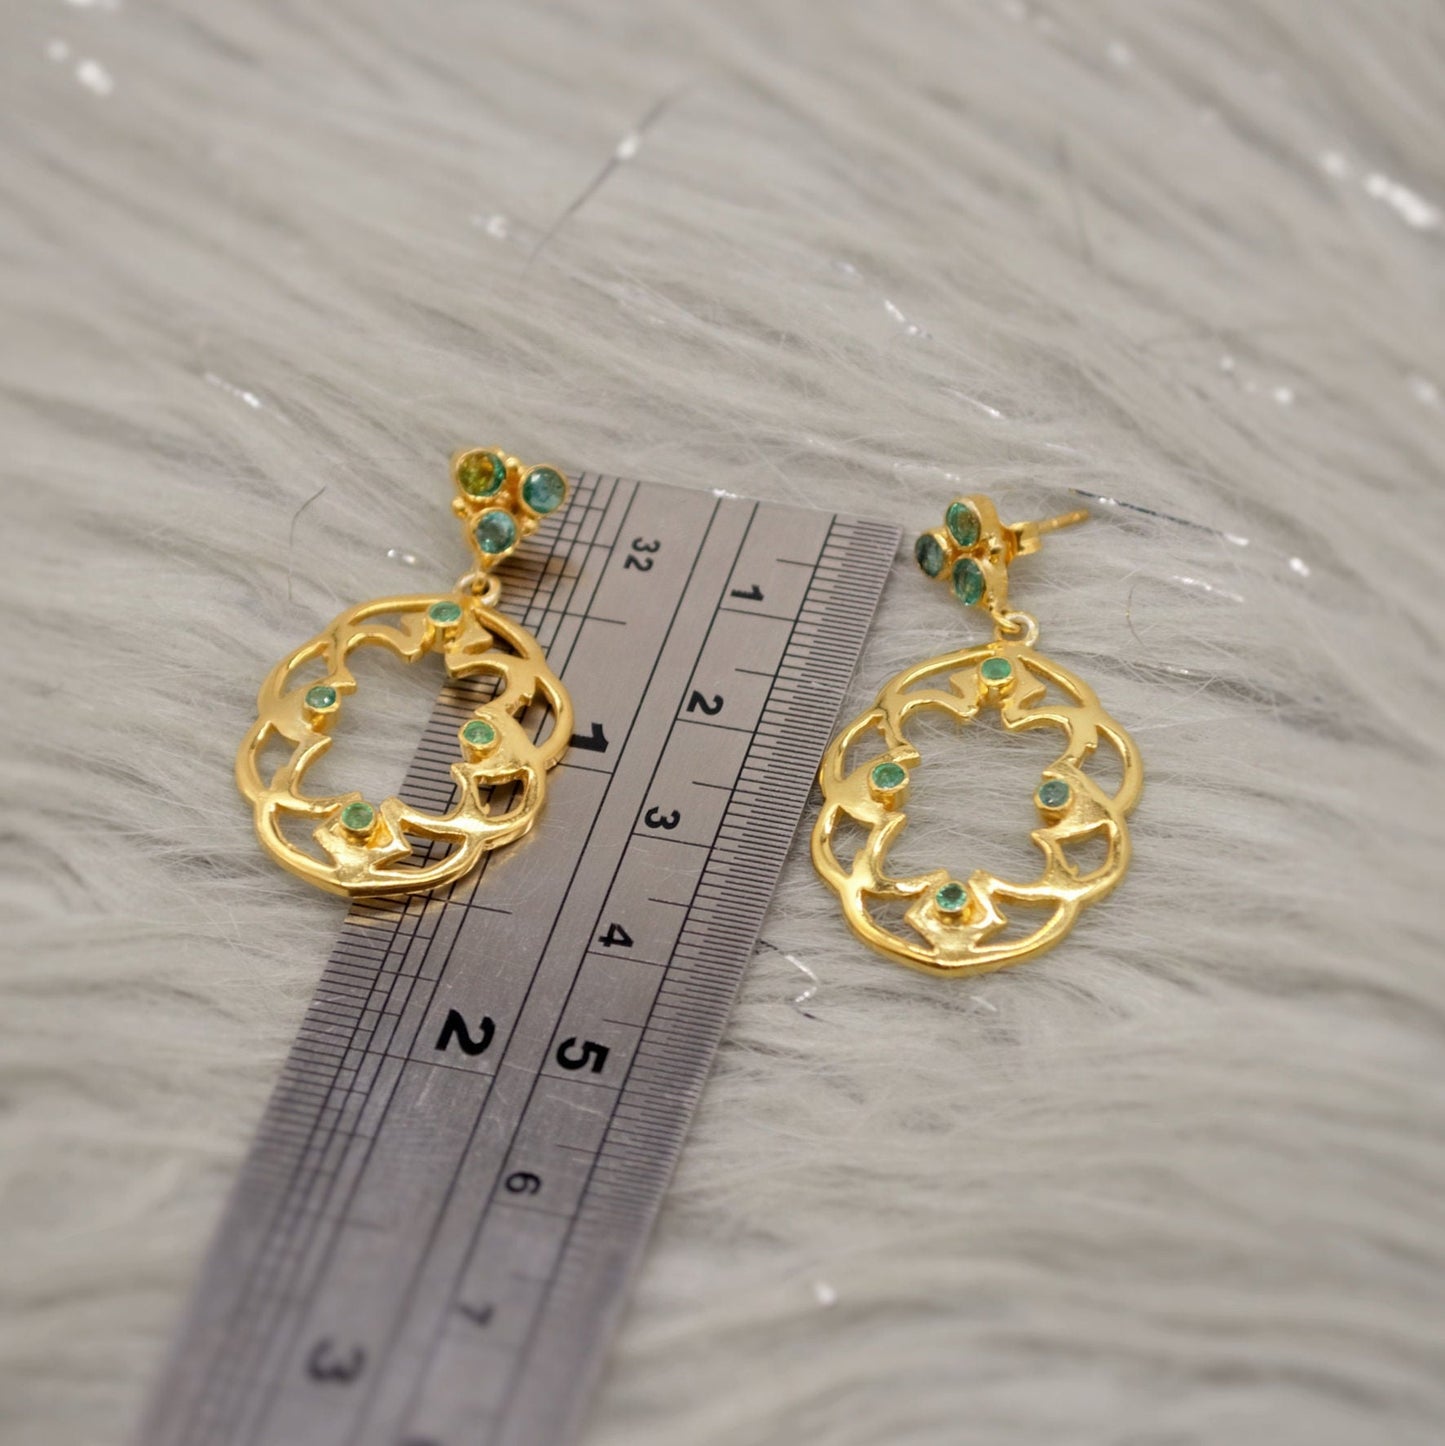 Green Emerald Earrings, Gold Plated Sterling Silver, Dangle Earrings Jewelry, May Birthstone Earrings, Gift For Her, Birthday Gift, Mom Gift